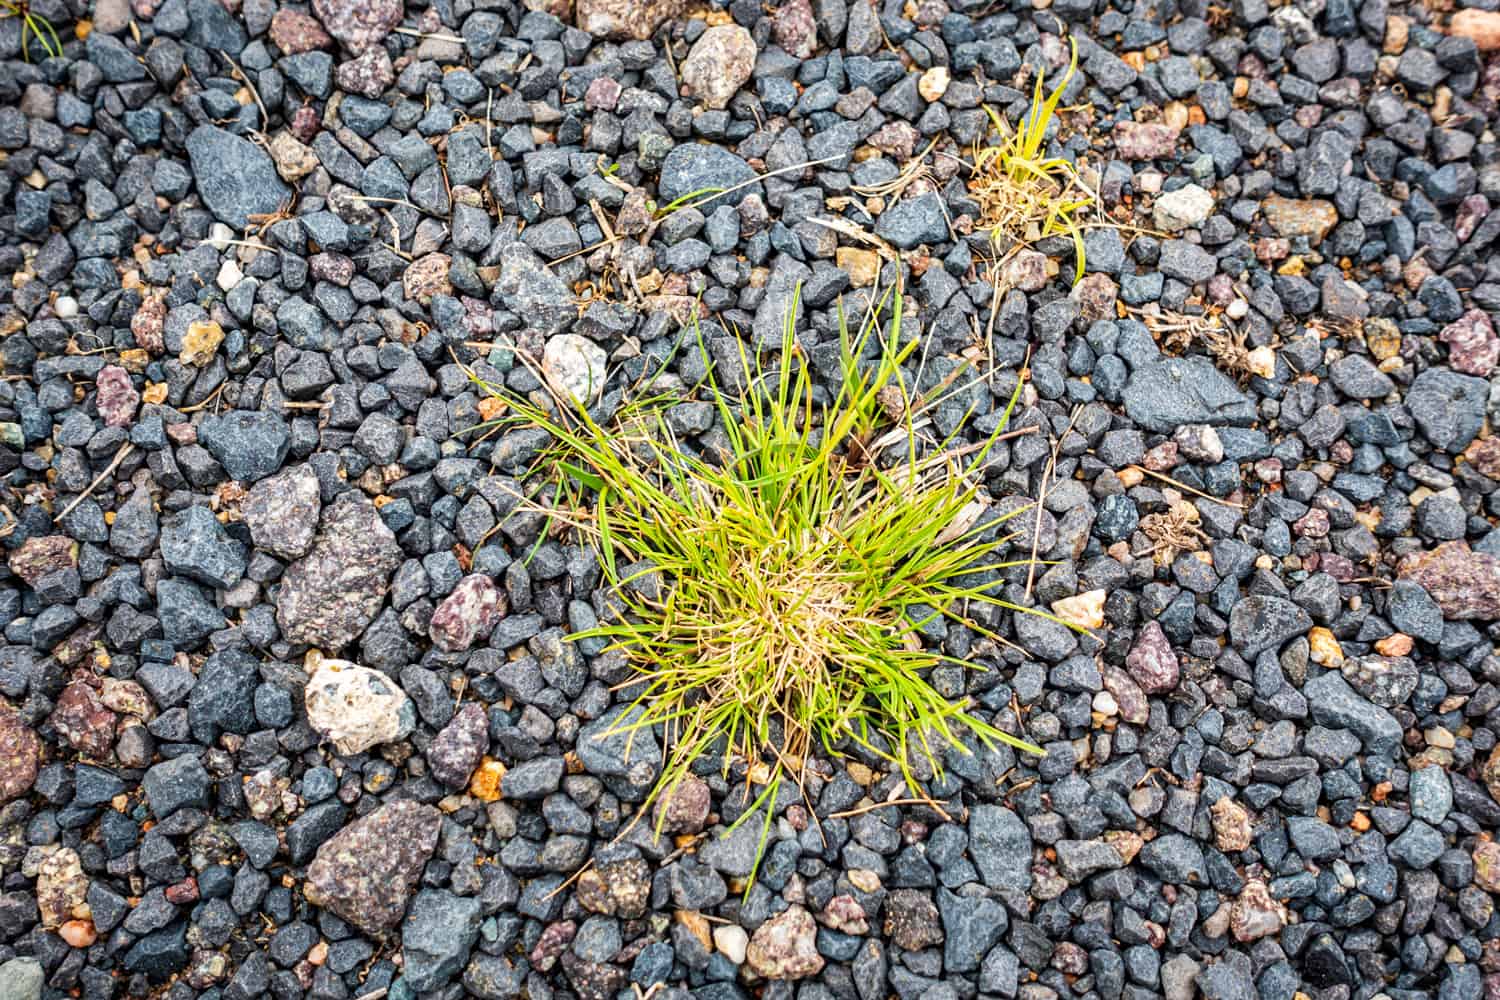 Two patches of green grass (one large, one small) surviving in a bed of pebbles in a dry growing condition.